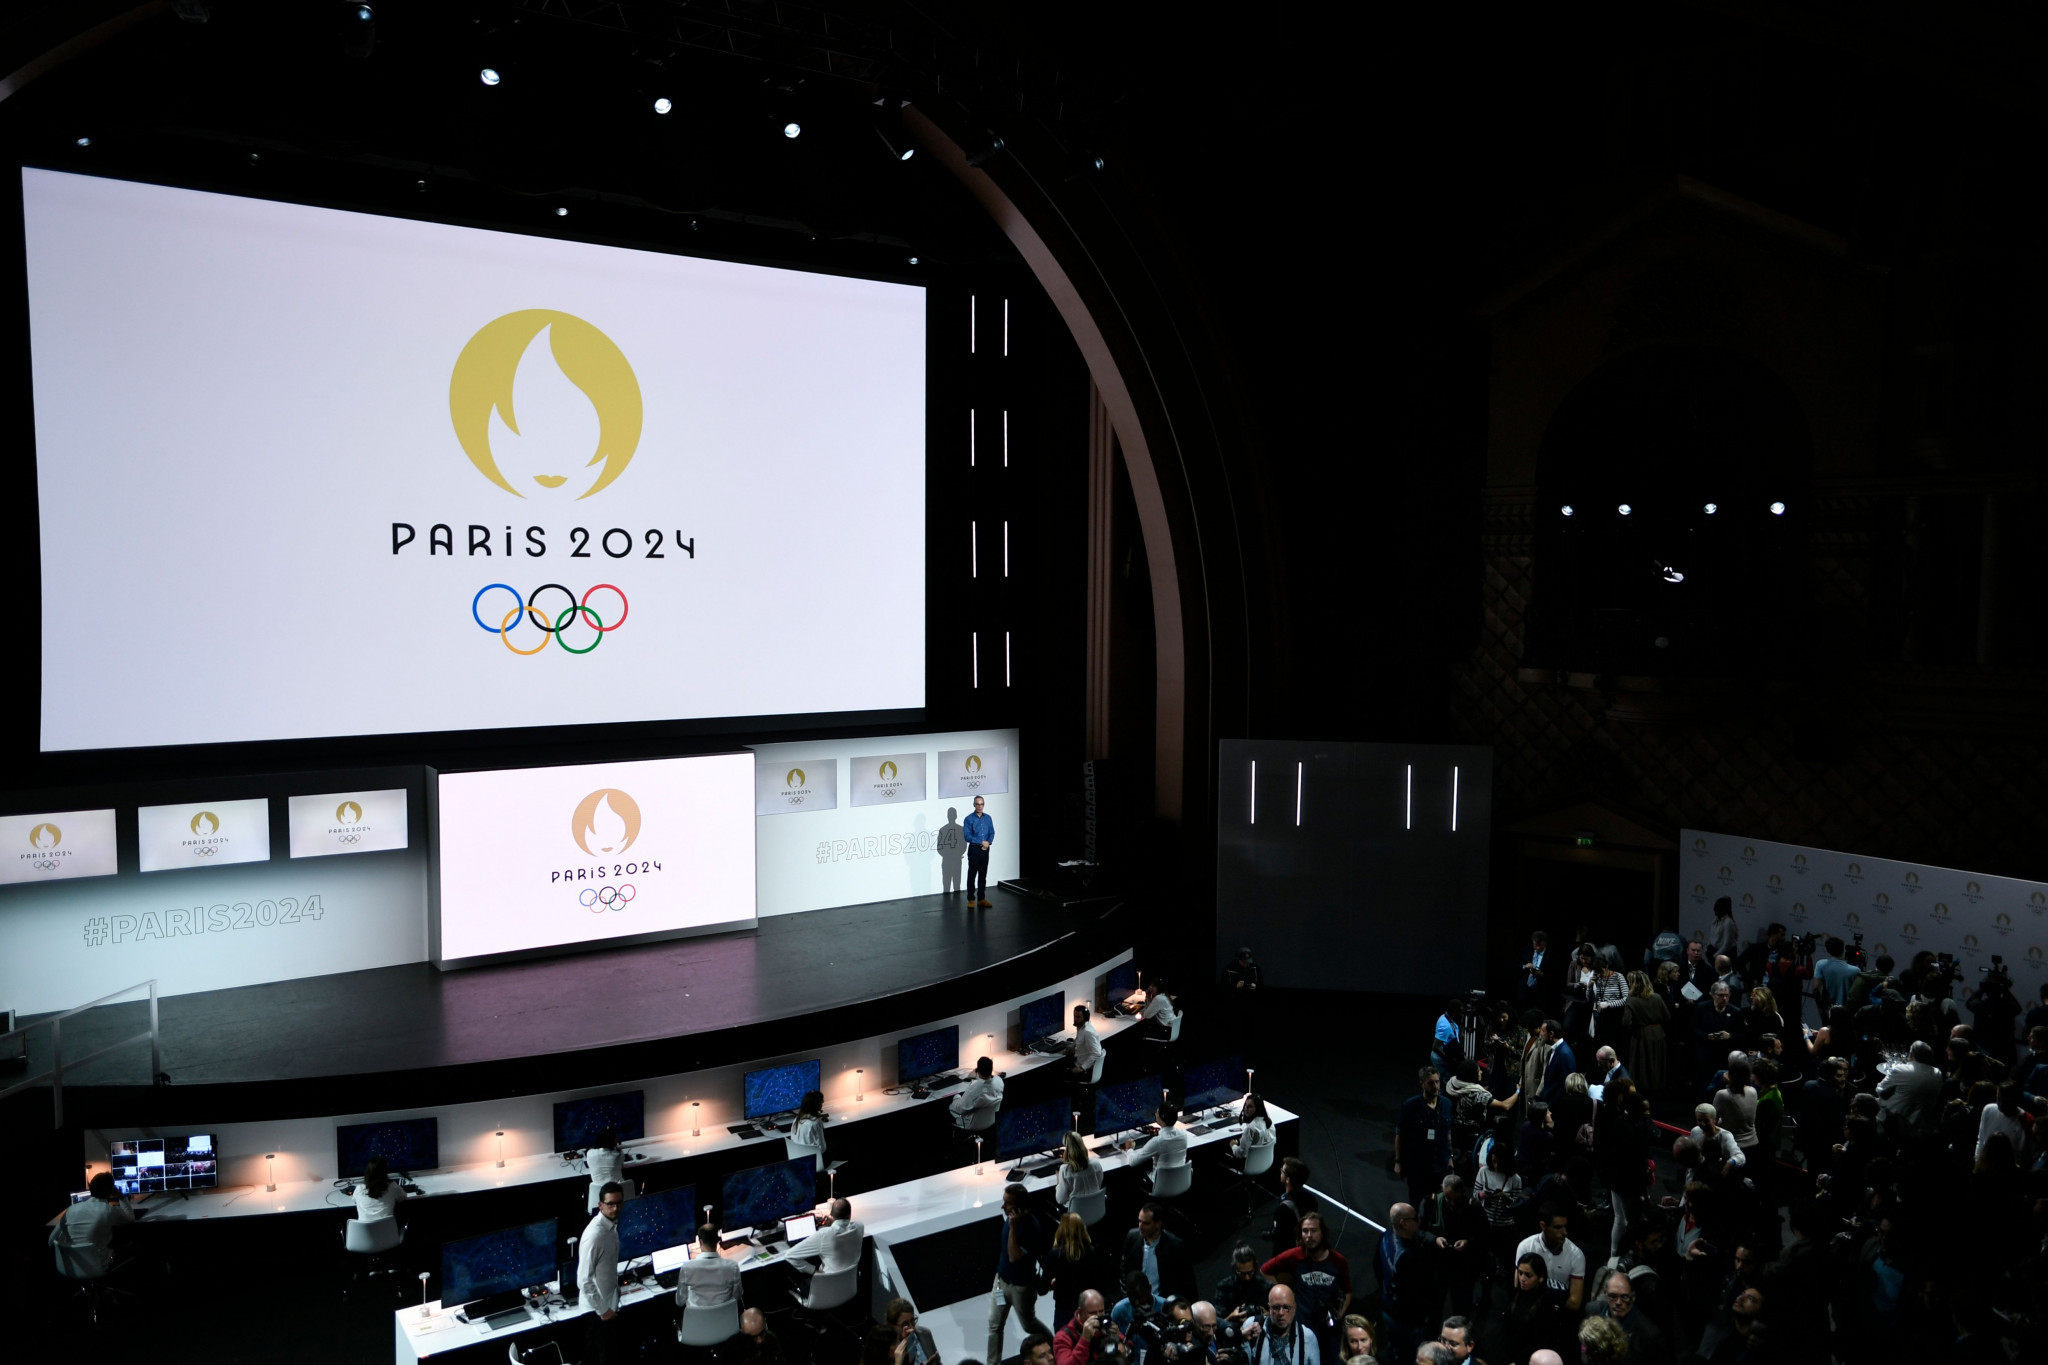 Paris 2024 stresses need to balance budget and "think outside the box" for Olympics